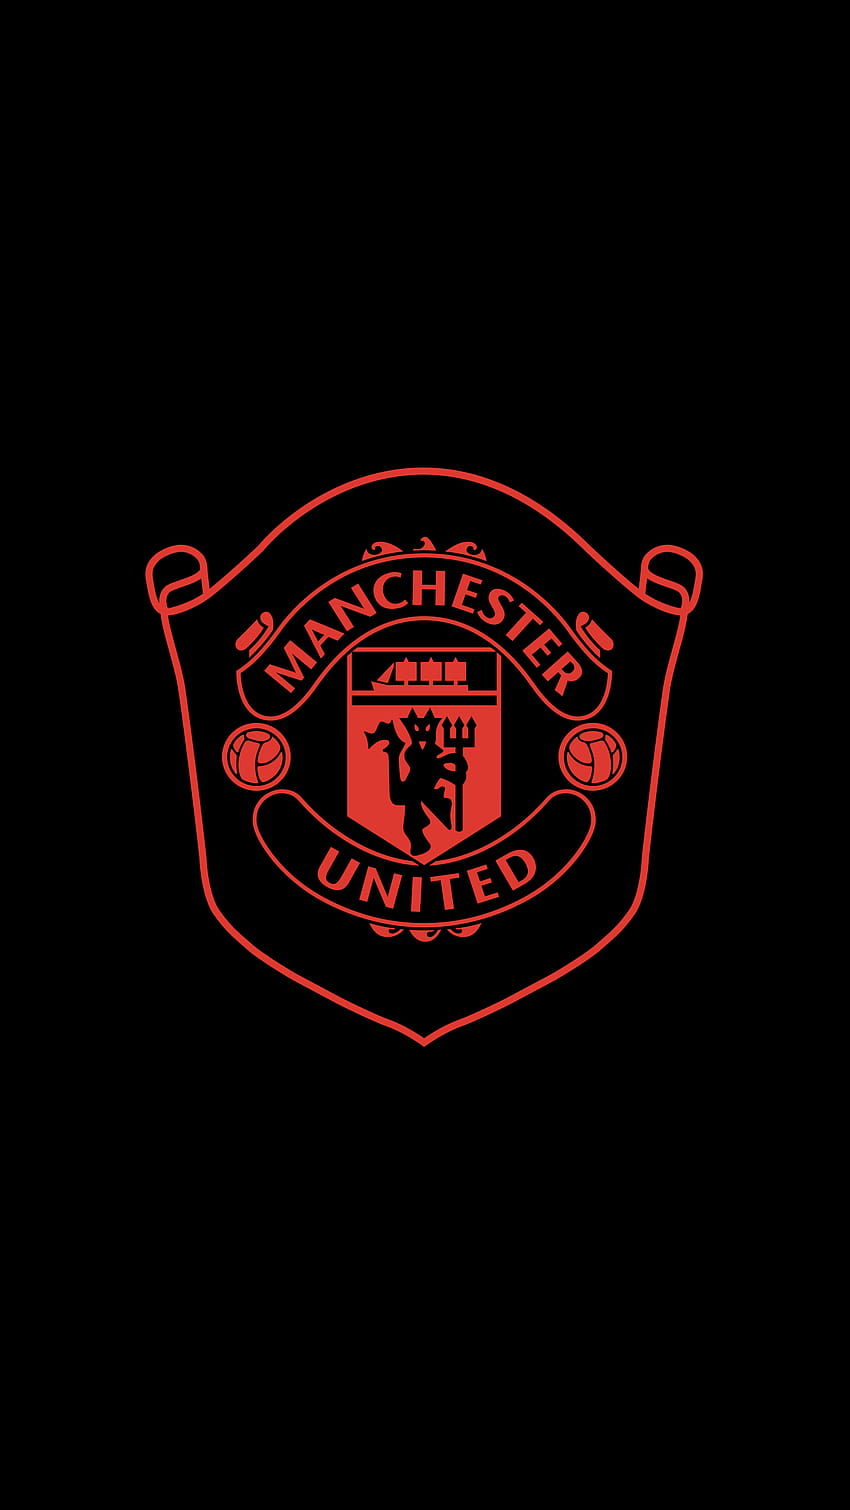 Manchester United posted by Sarah Anderson, man utd logo mobile HD phone wallpaper